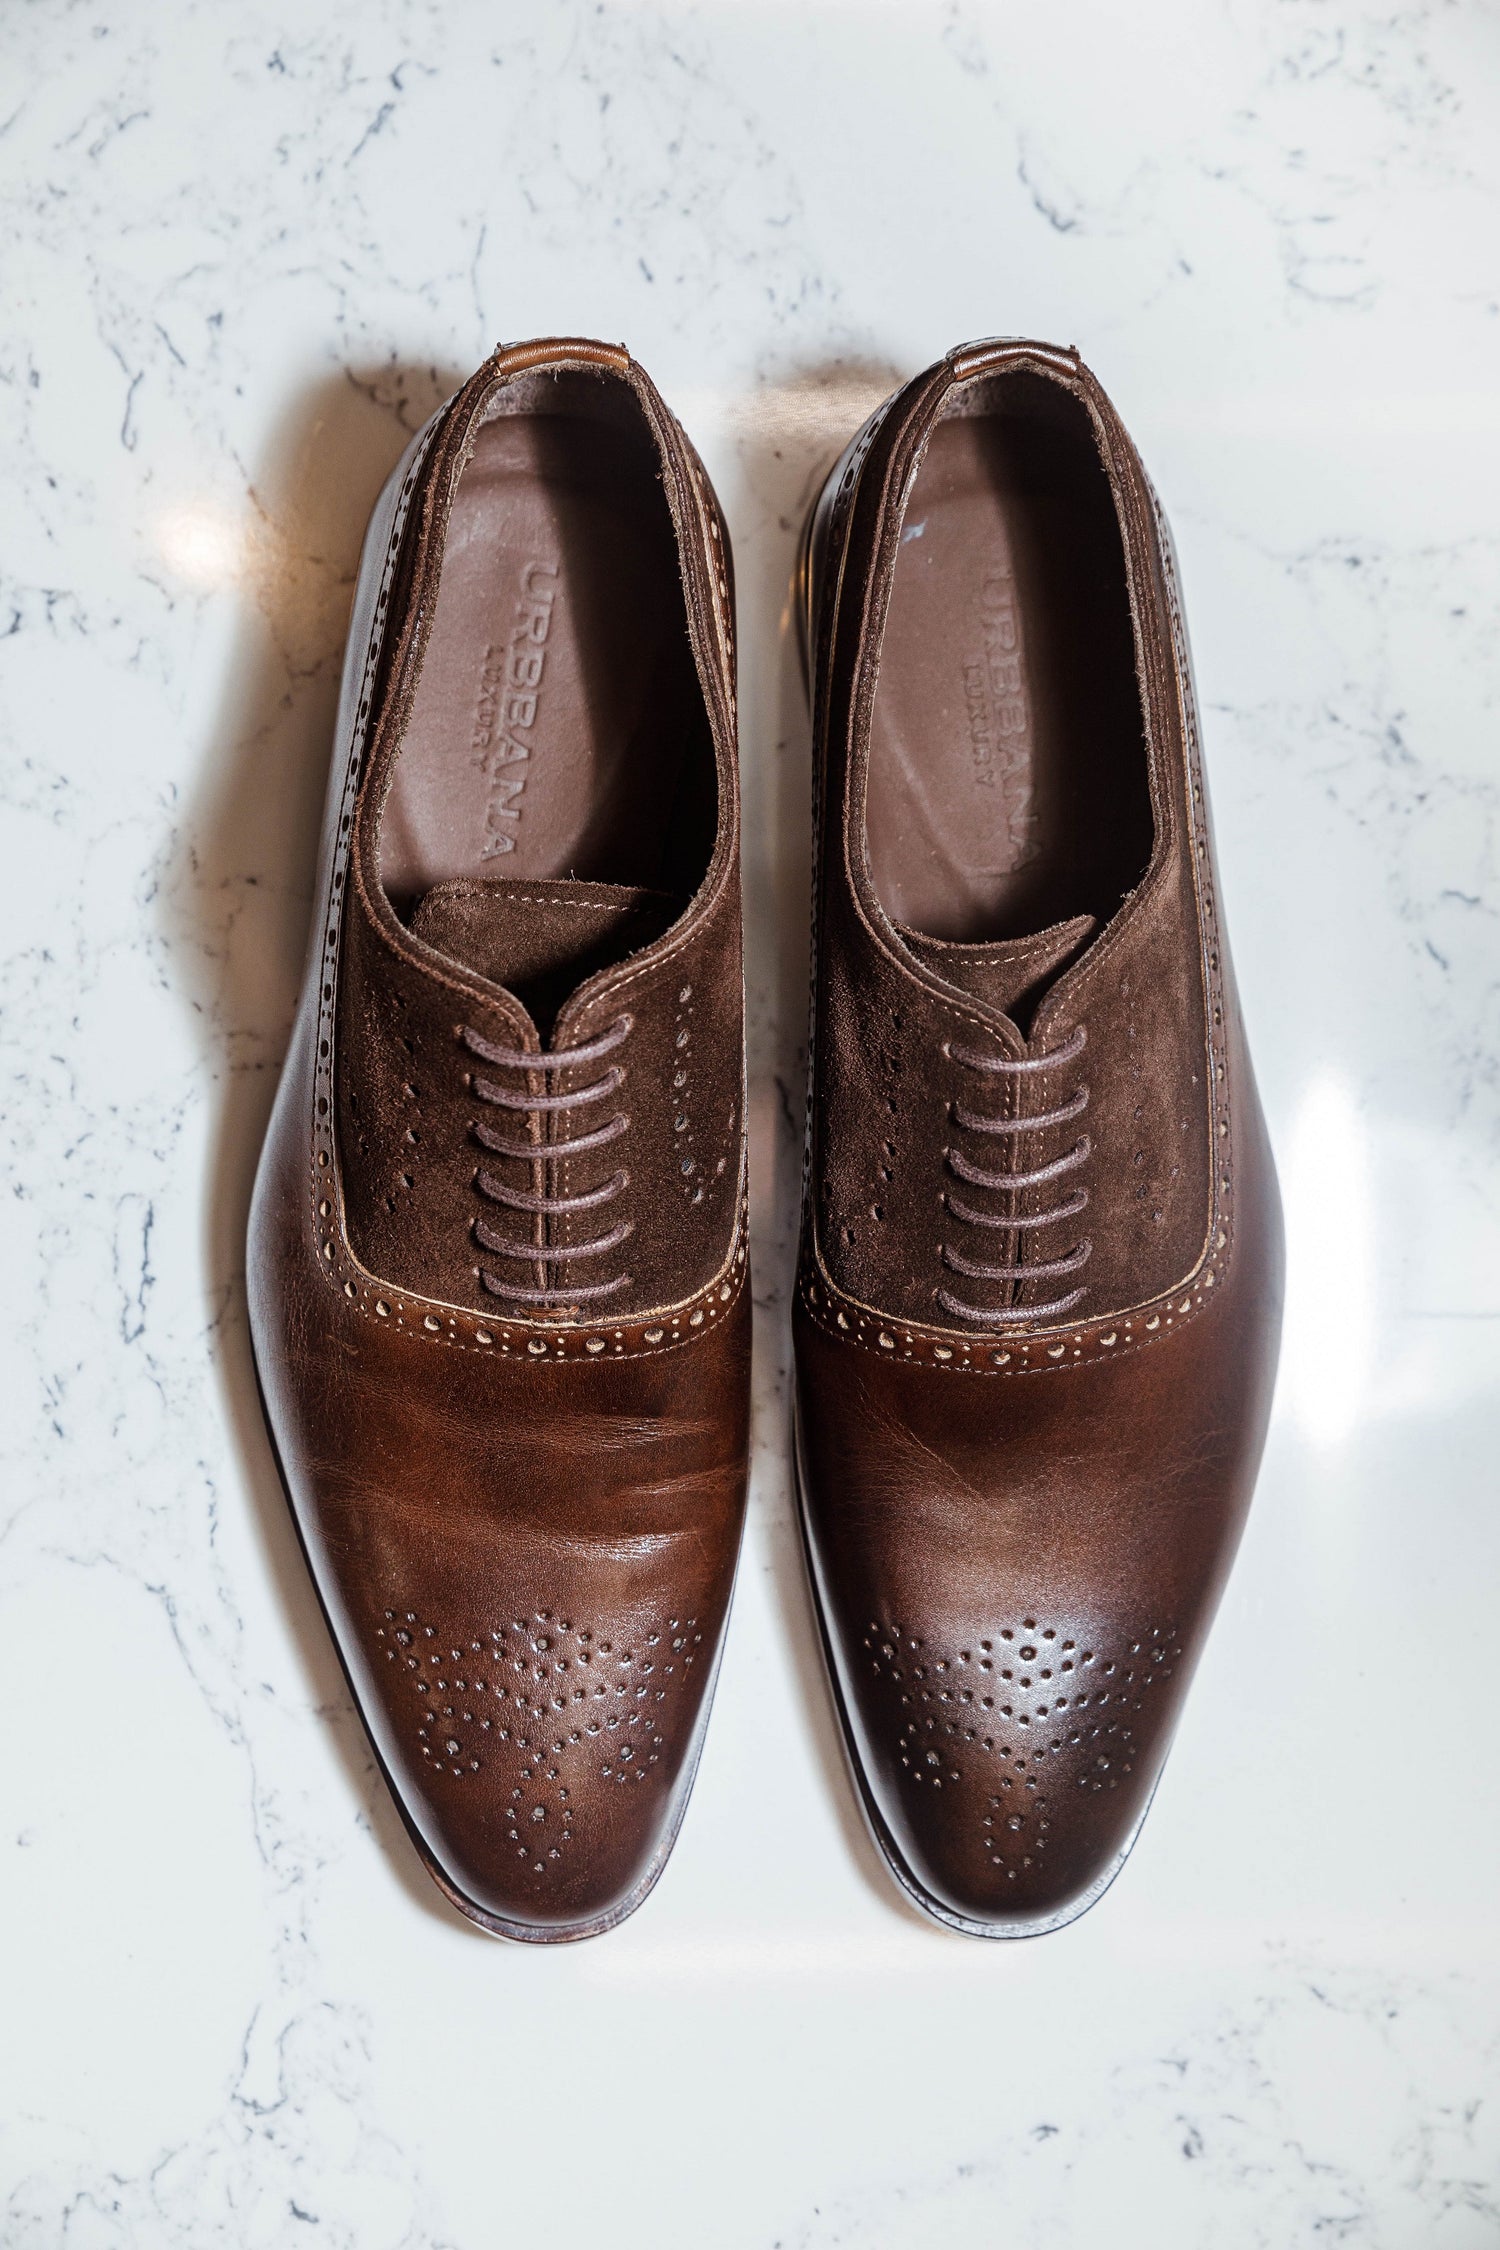 Fuente Shoes - Brown - Shoes by Urbbana